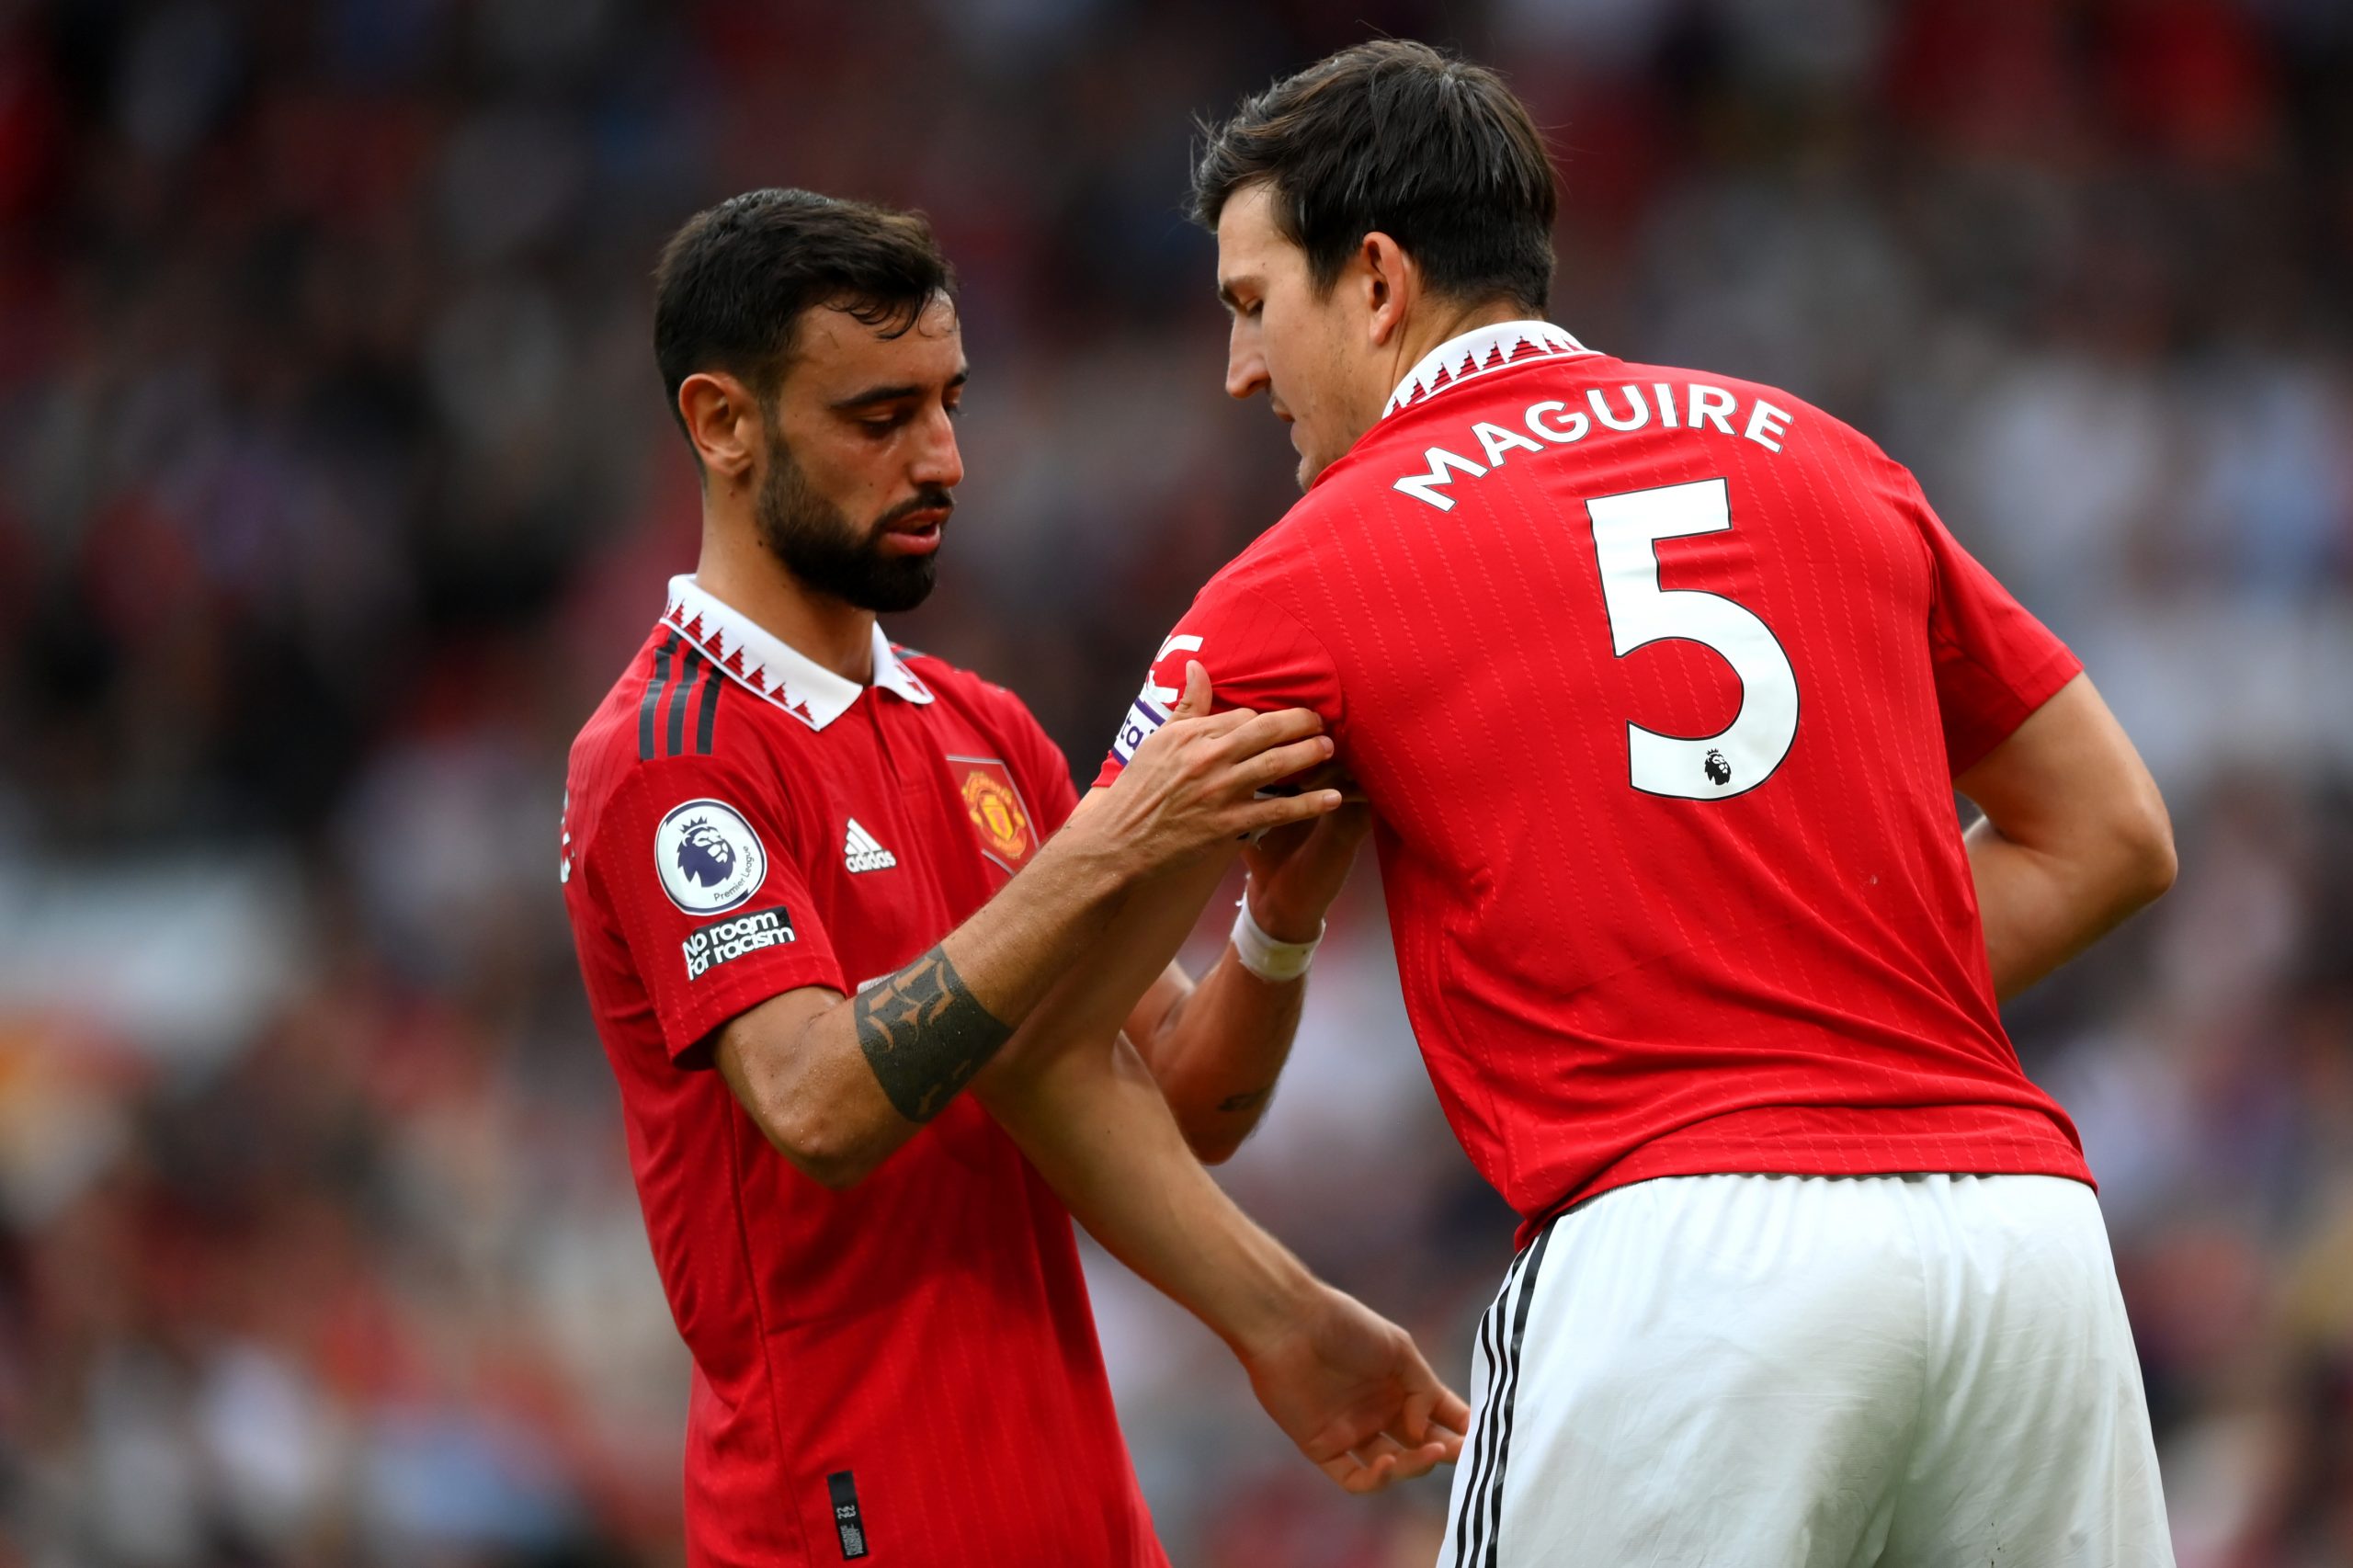 Bruno Fernandes of Manchester United gives the captain's armband to Harry Maguire against Arsenal. (Photo by Shaun Botterill/Getty Images)